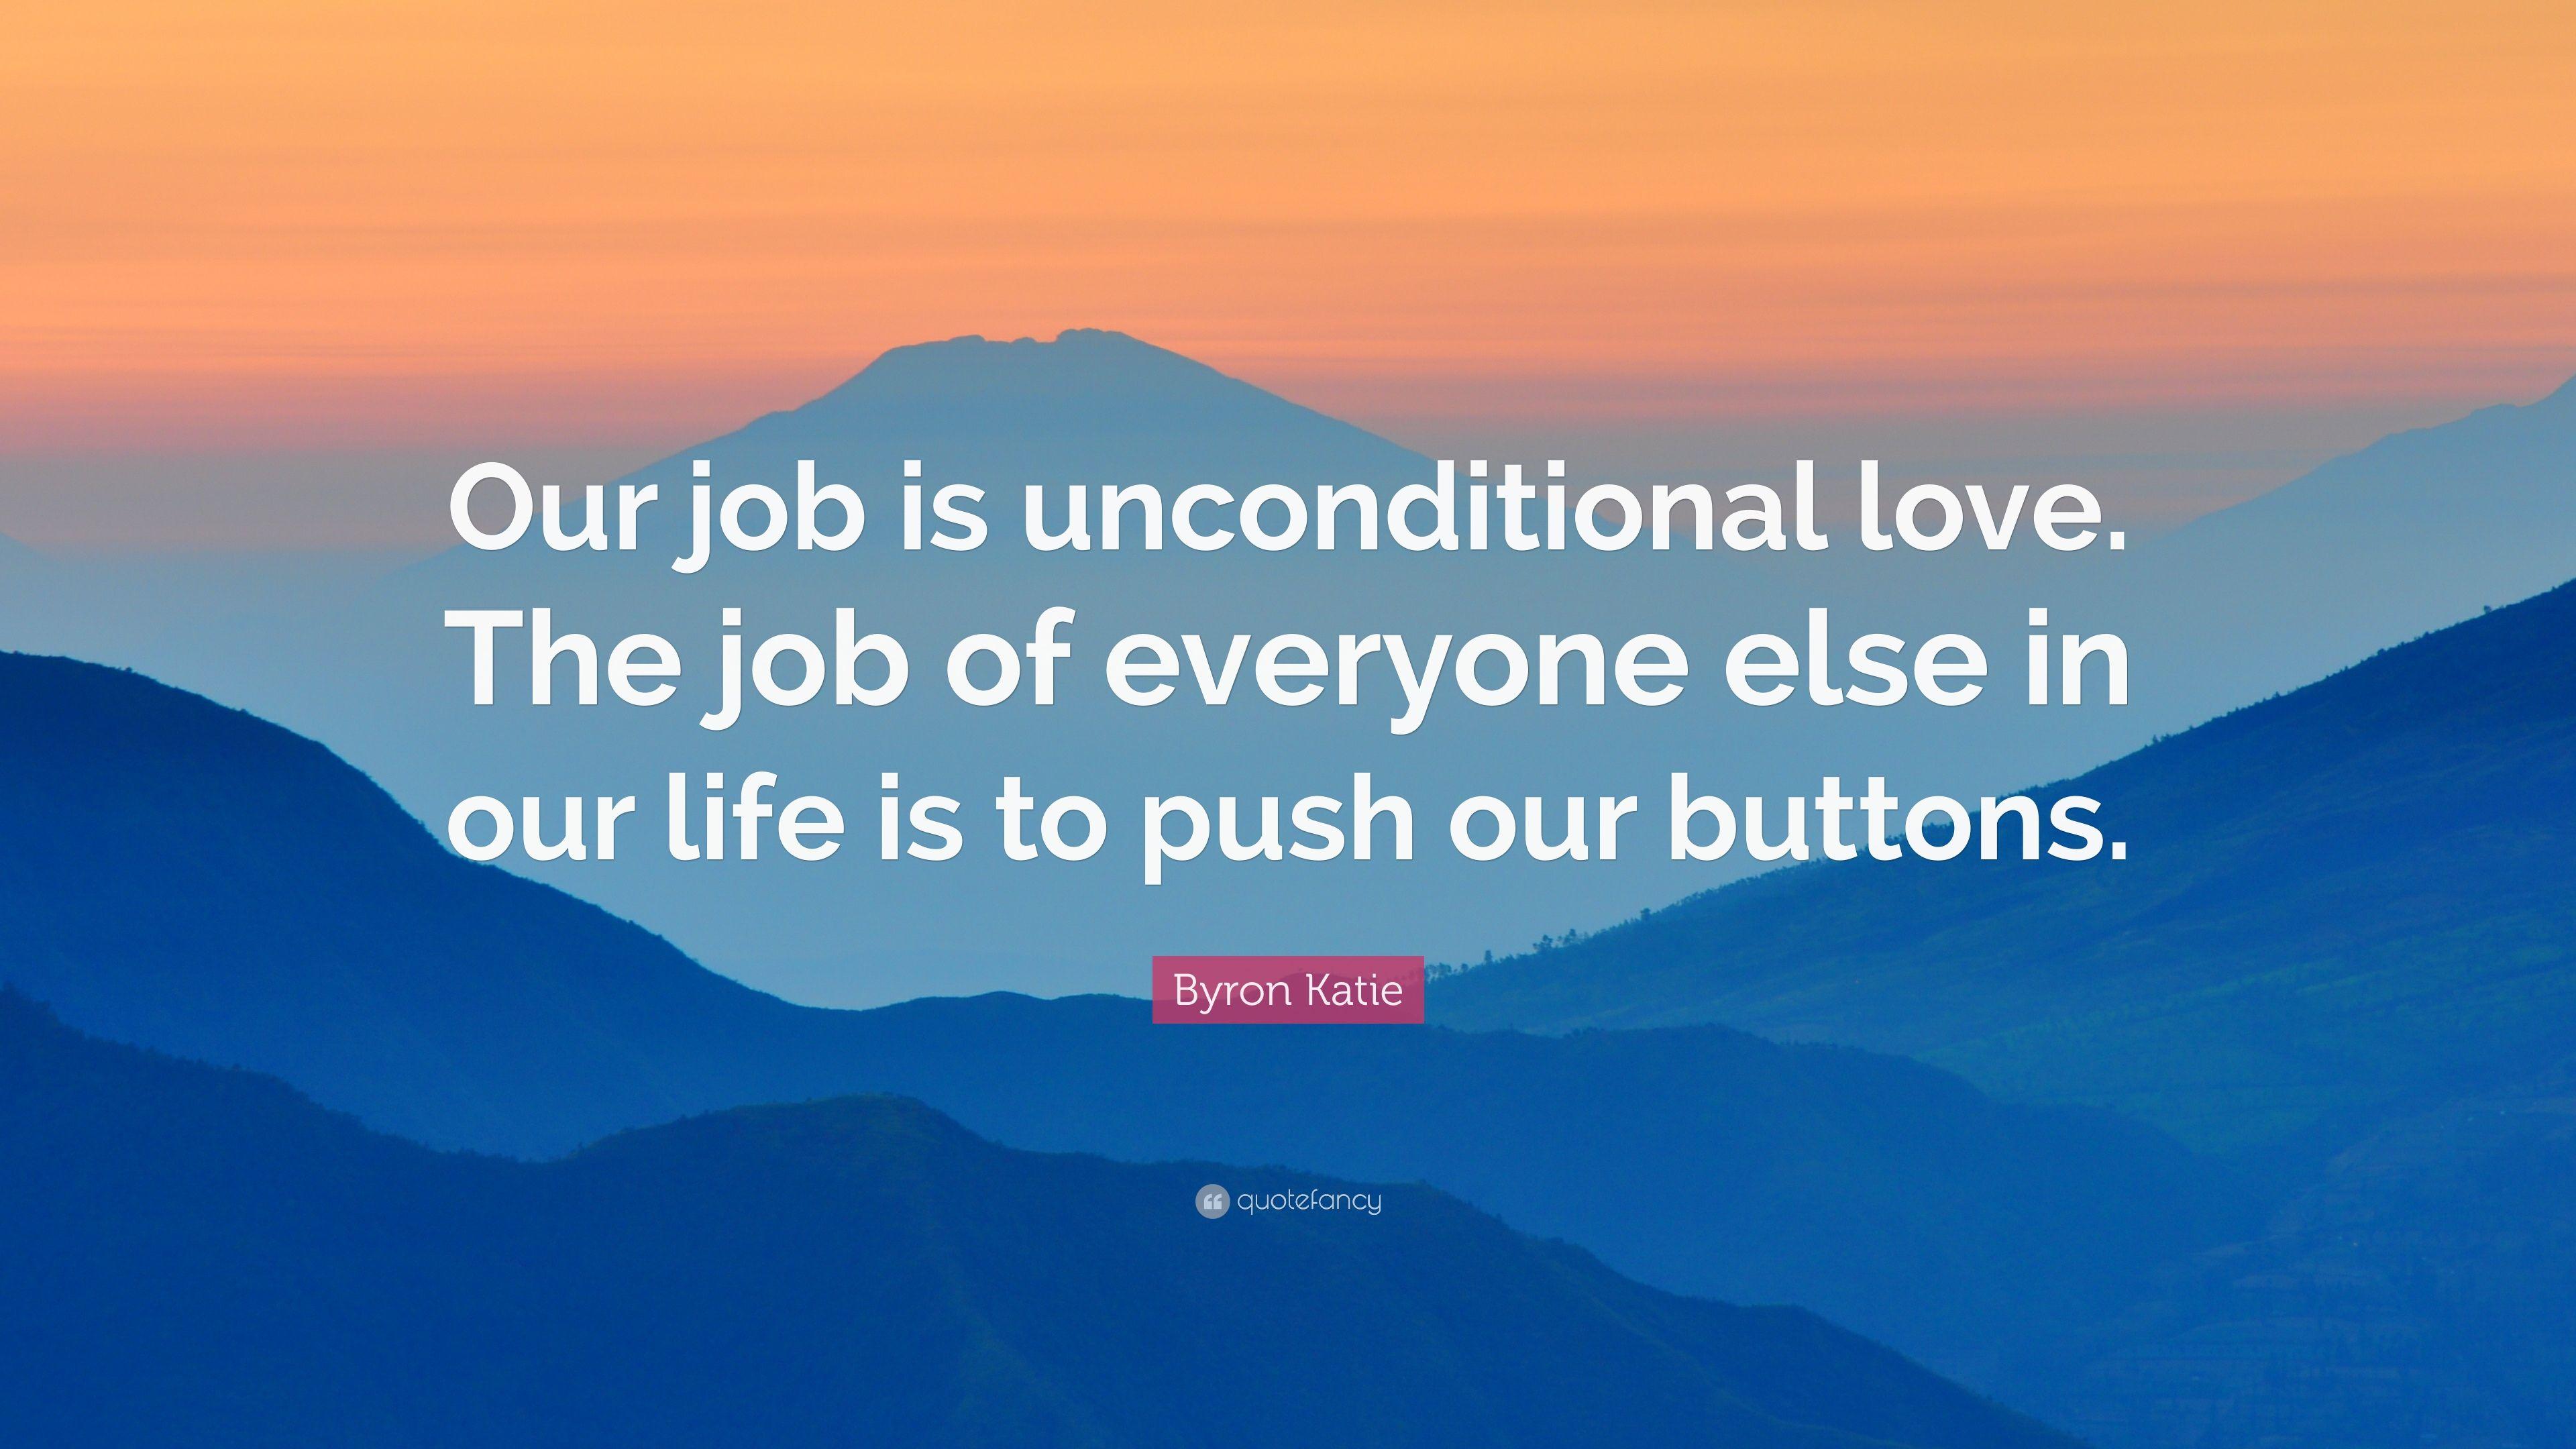 Byron Katie Quote: “Our job is unconditional love